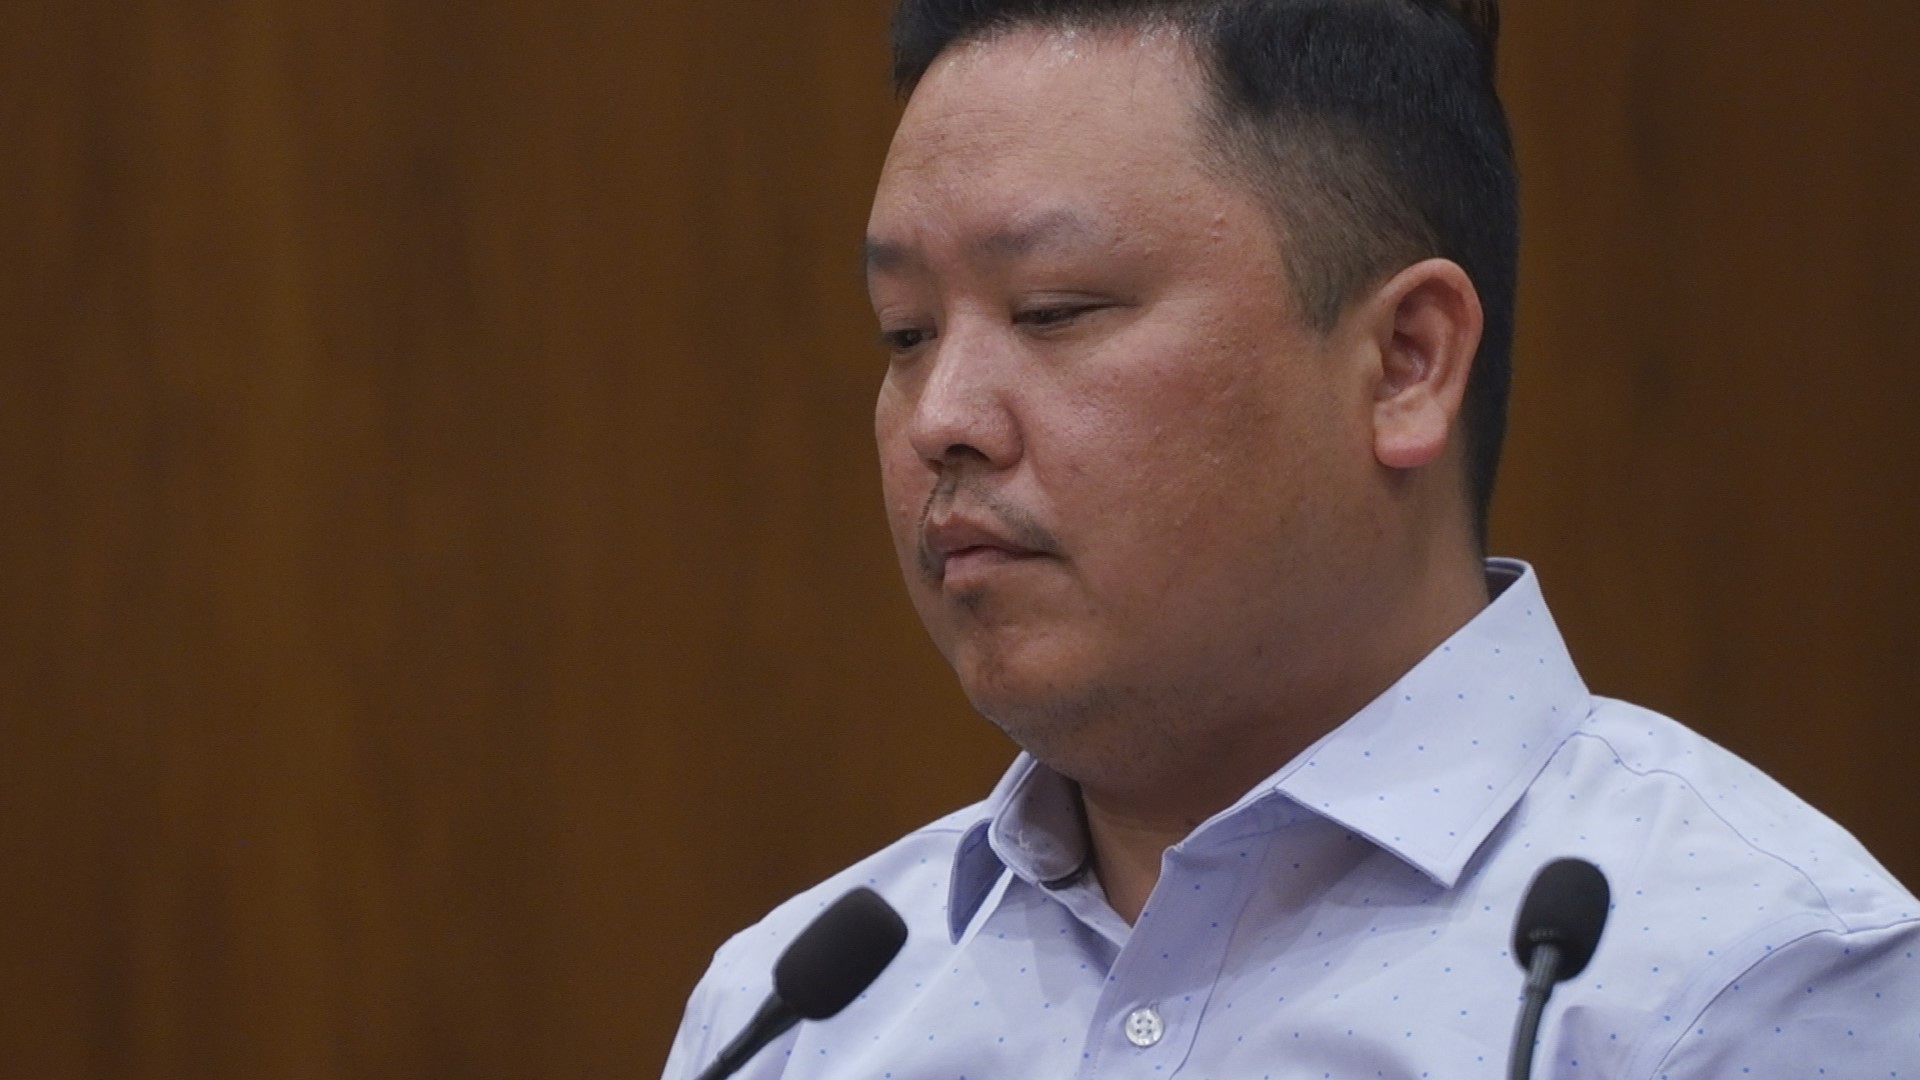 Allen Vang was arraigned in Sacramento County Court Wednesday, May 1, for his alleged involvement in a crash that killed one man and hospitalized his wife and child.